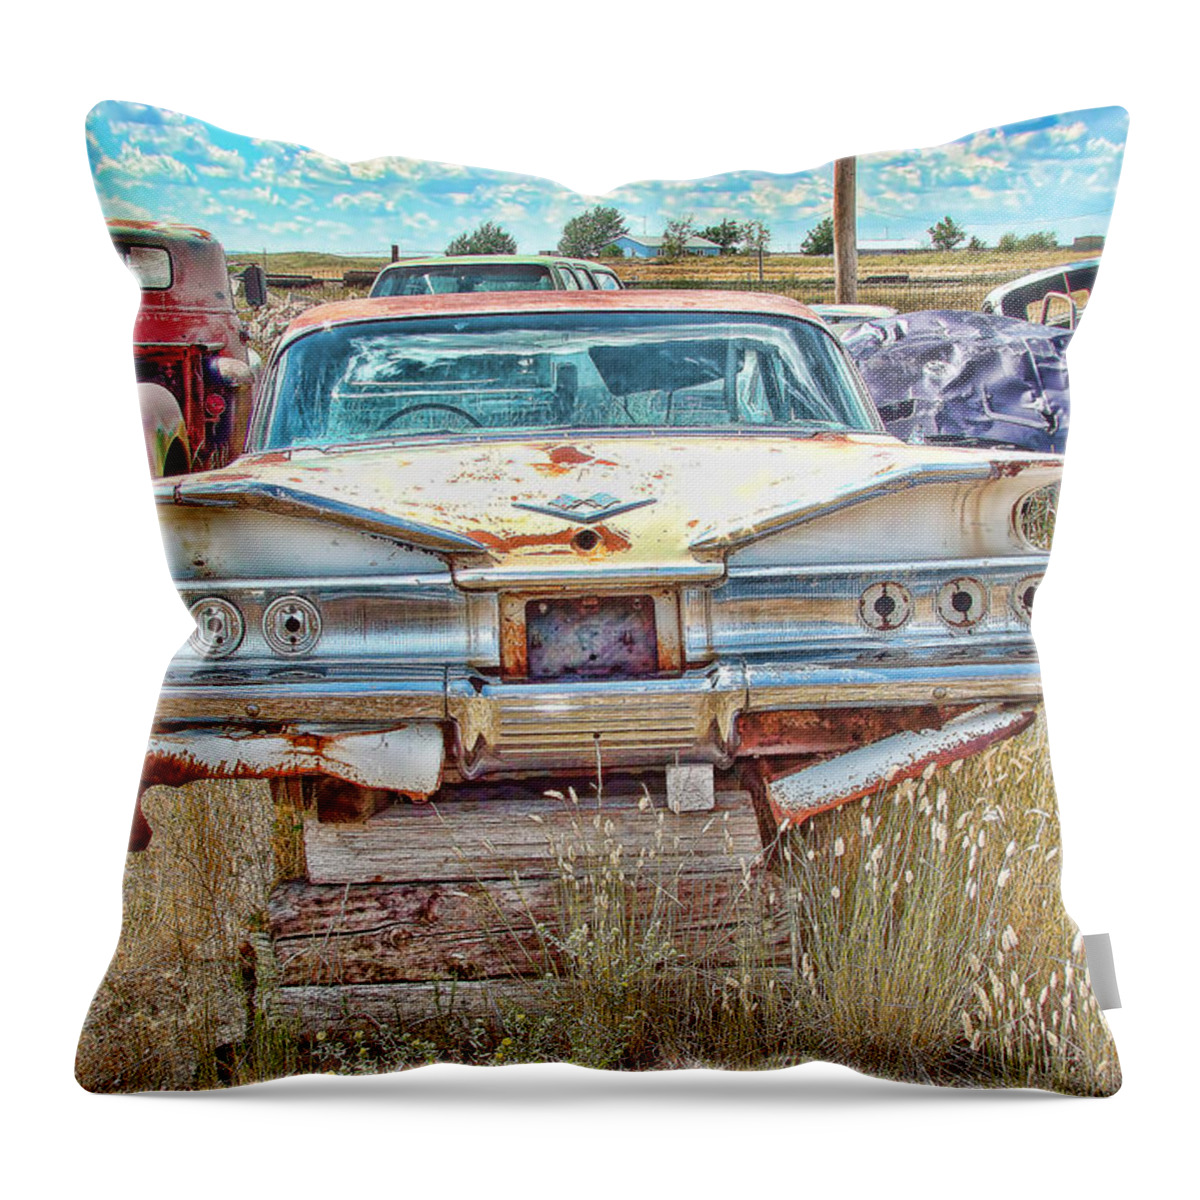 1960's Chevrolet Impala Throw Pillow featuring the photograph Junkyard Series 1960's Chevrolet Impala by Cathy Anderson